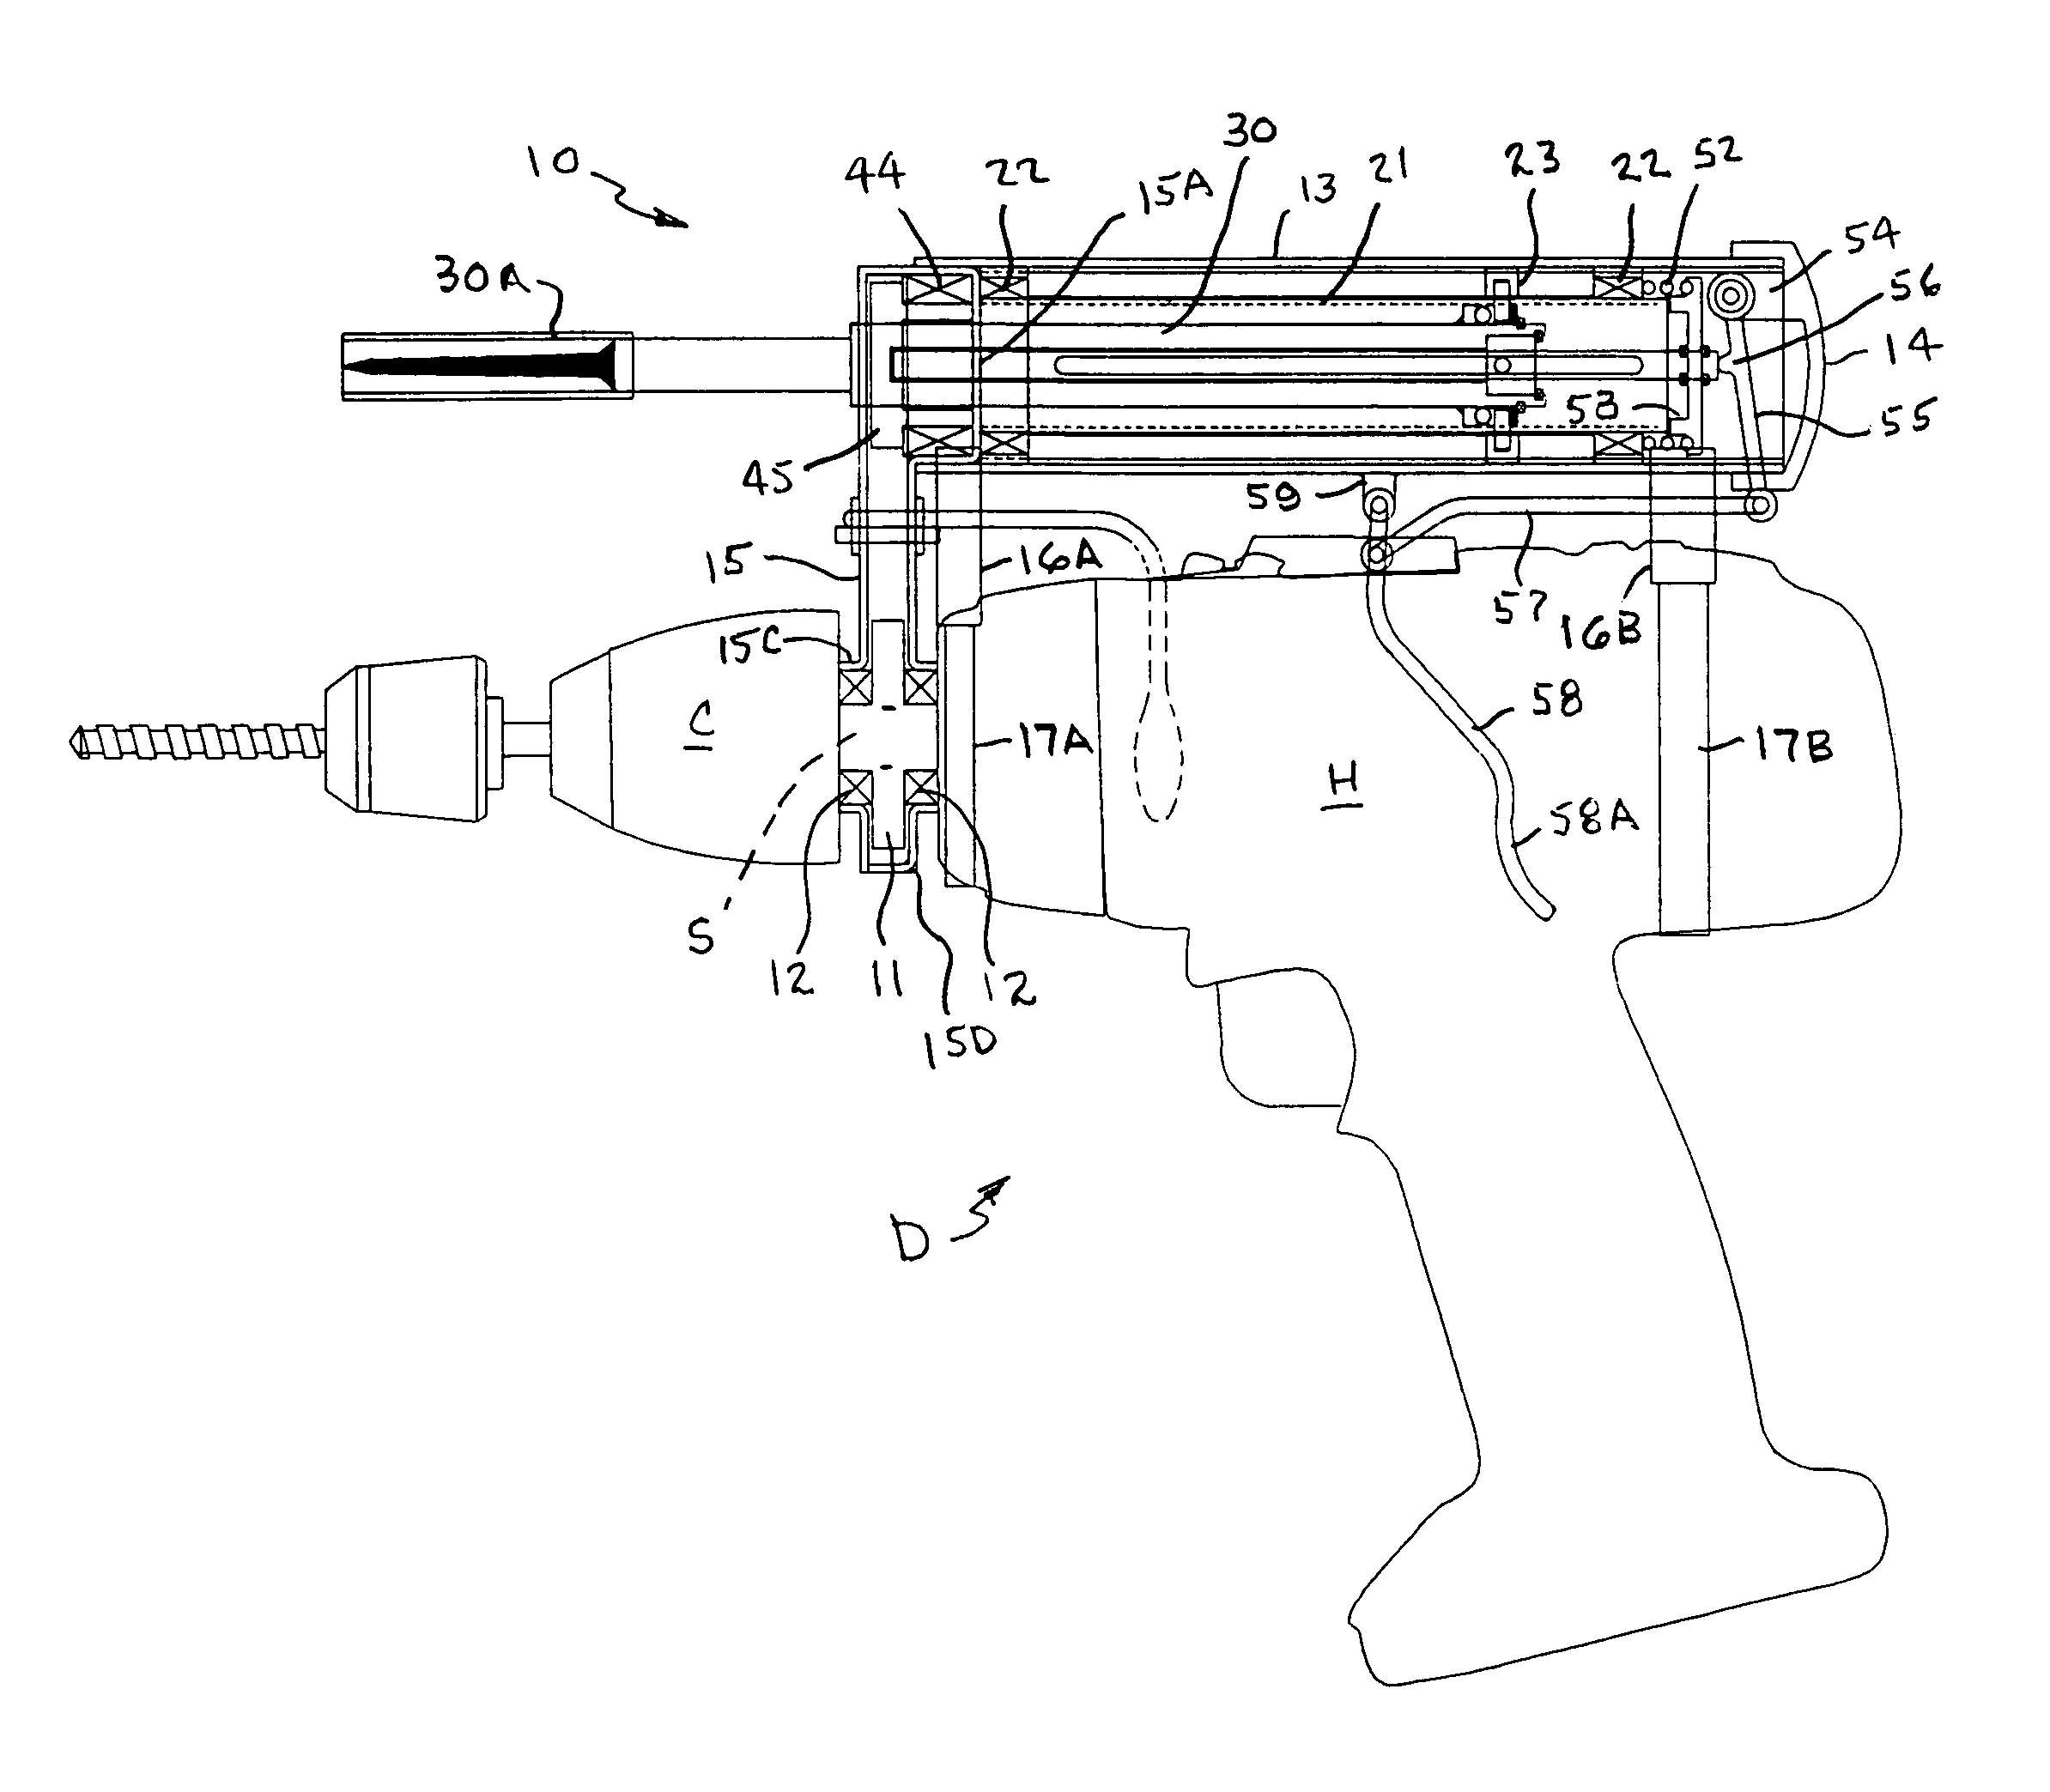 Auxiliary rotary tool drive for hand-held power tools